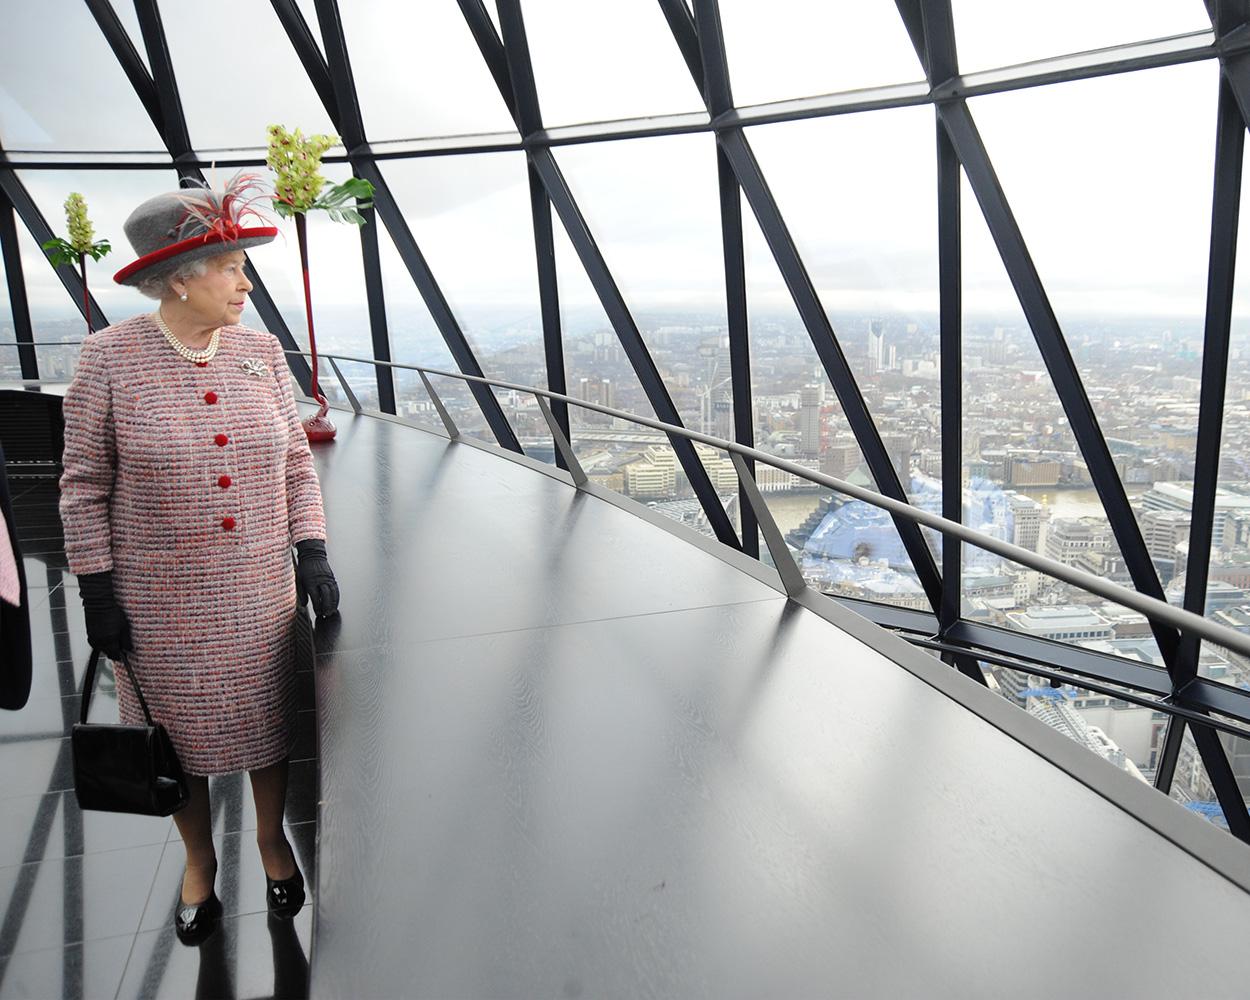 Richard Young Portrait Photograph - Queen Elizabeth II at the Gherkin, London, 2010, Photography